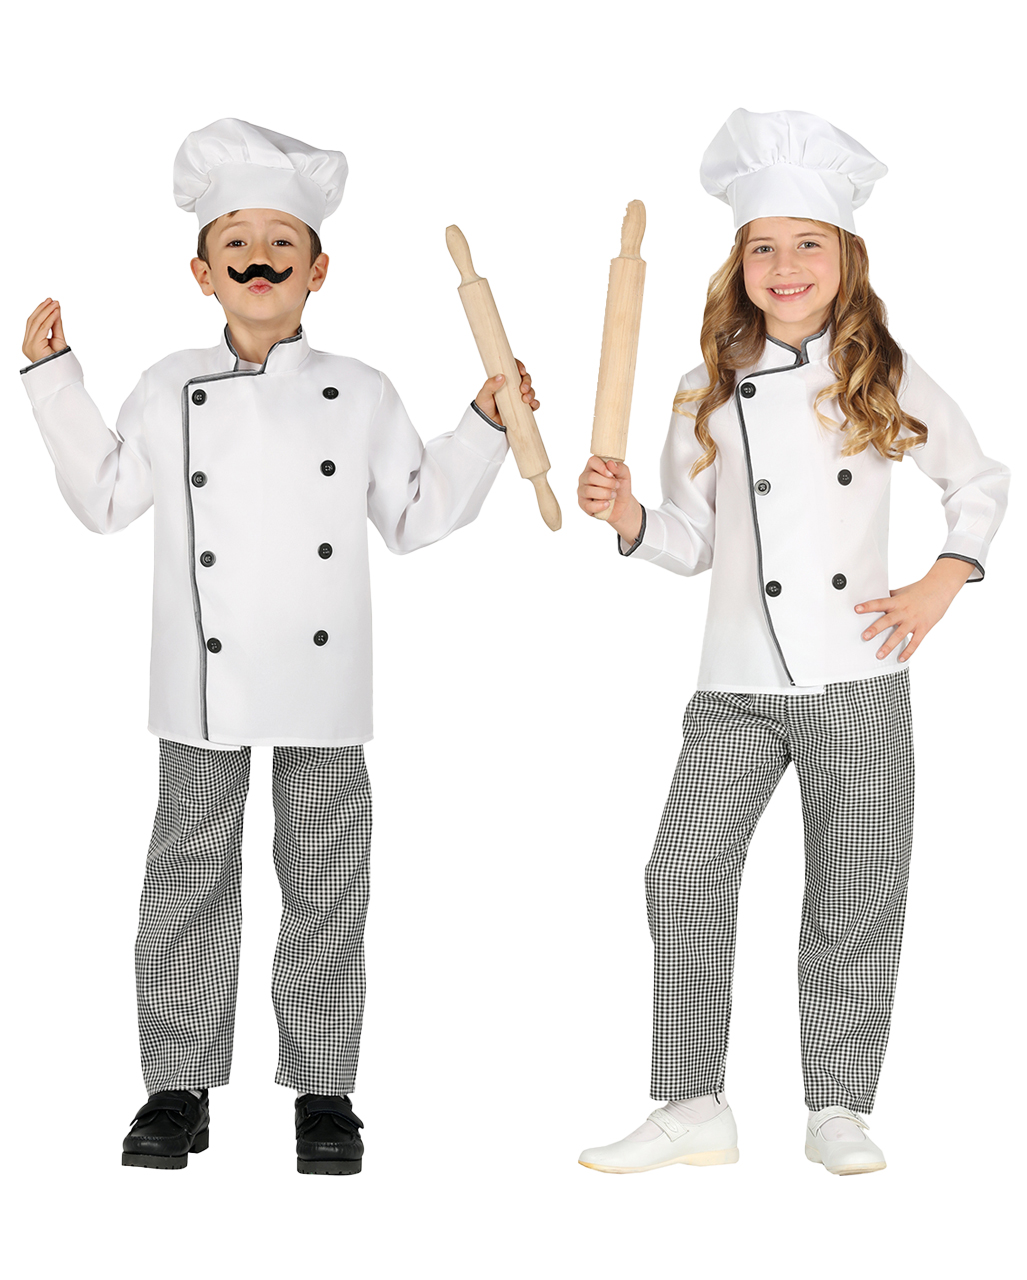 DIY Chef Costume For Kids - YouTube